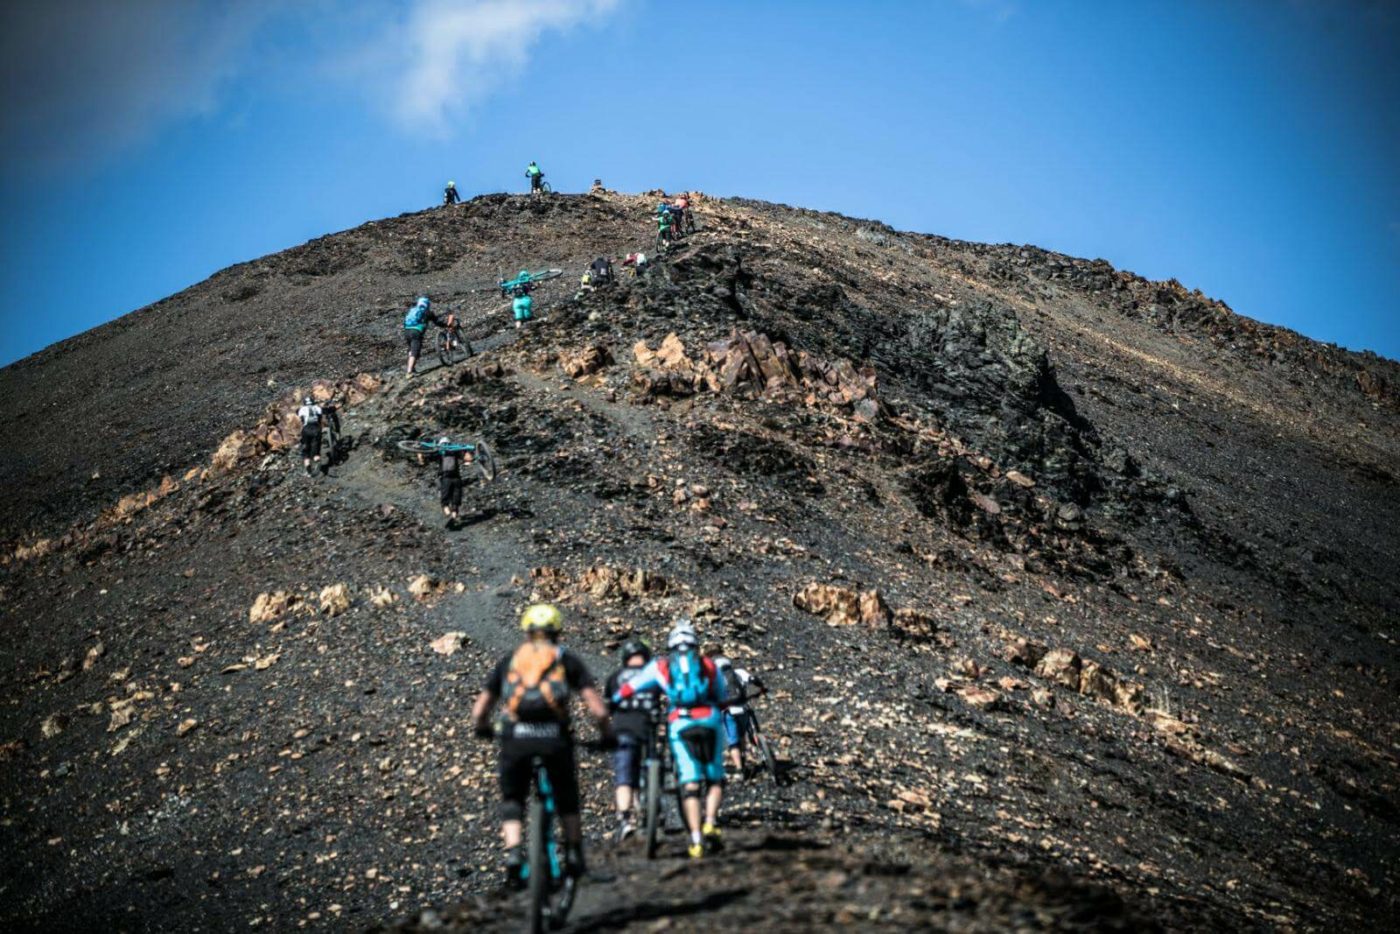 Several mountain bikers—some walking their bikes and some riding them—going up a steep dirt hill in the Pyrenees mountains in Spain.